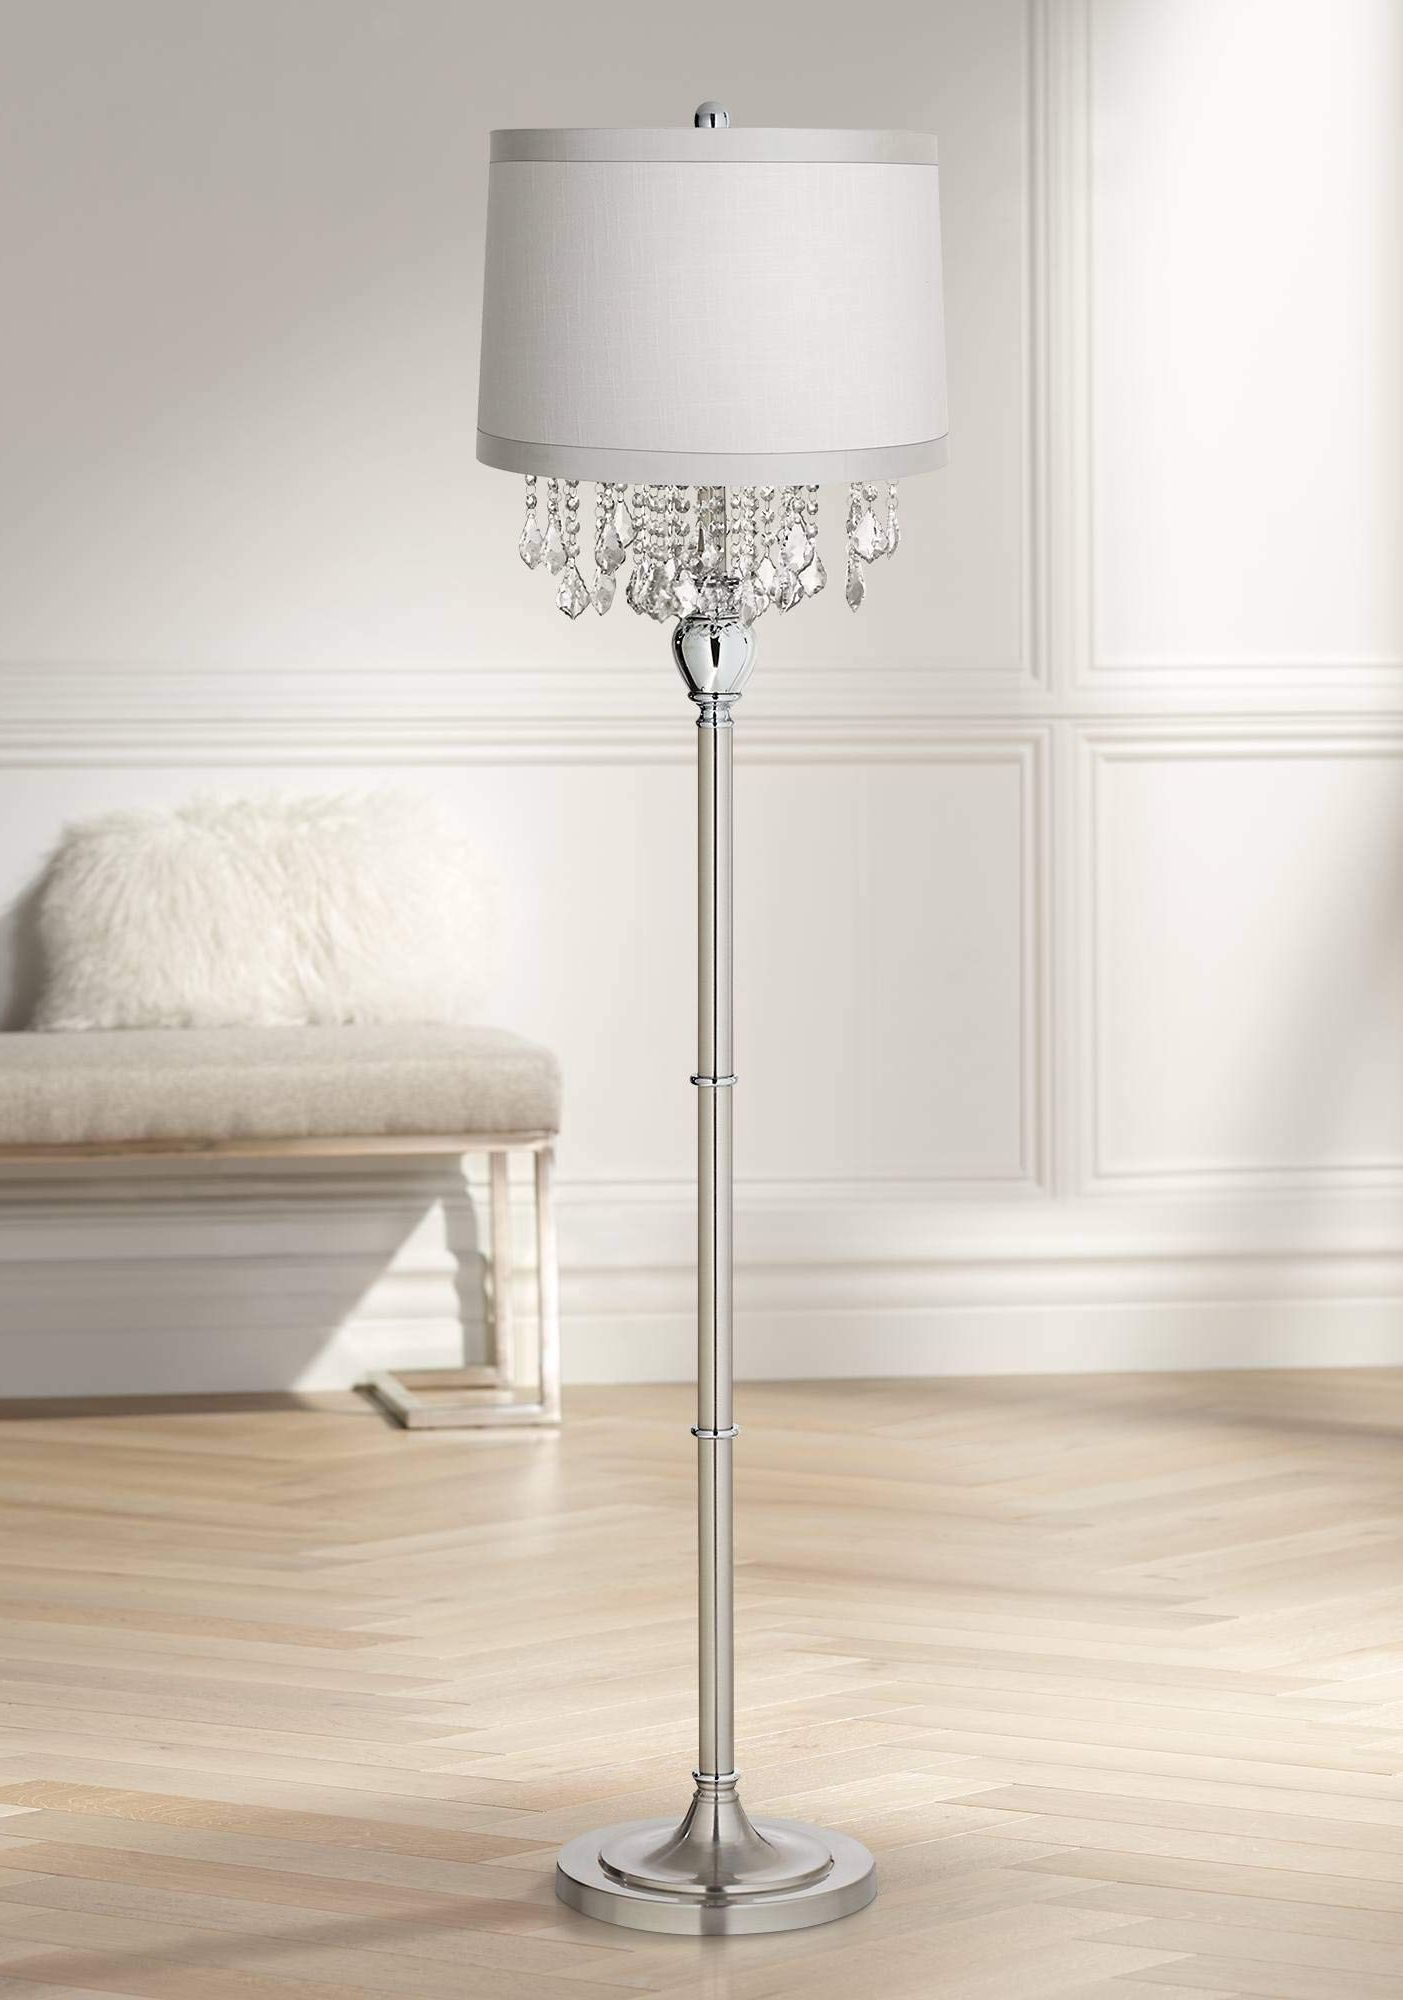 Wide Crystal Standing Lamps Pertaining To Famous 360 Lighting Luxury Crystal Chandelier Style Floor Lamp Standing Base  (View 1 of 15)